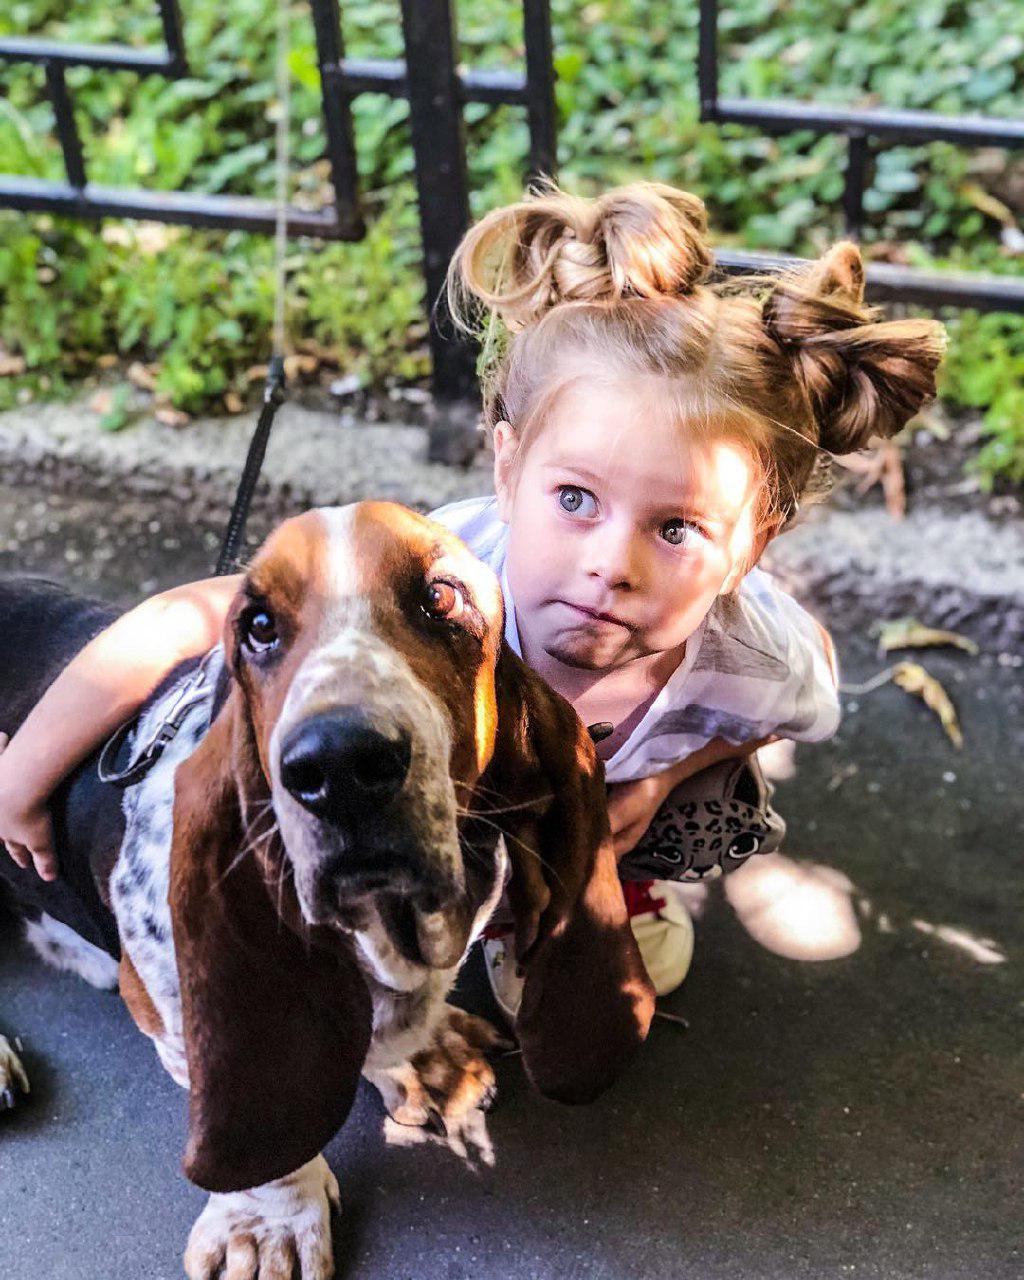 A Basset Hound standing on the pavement while a little girl is sitting beside and embracing him